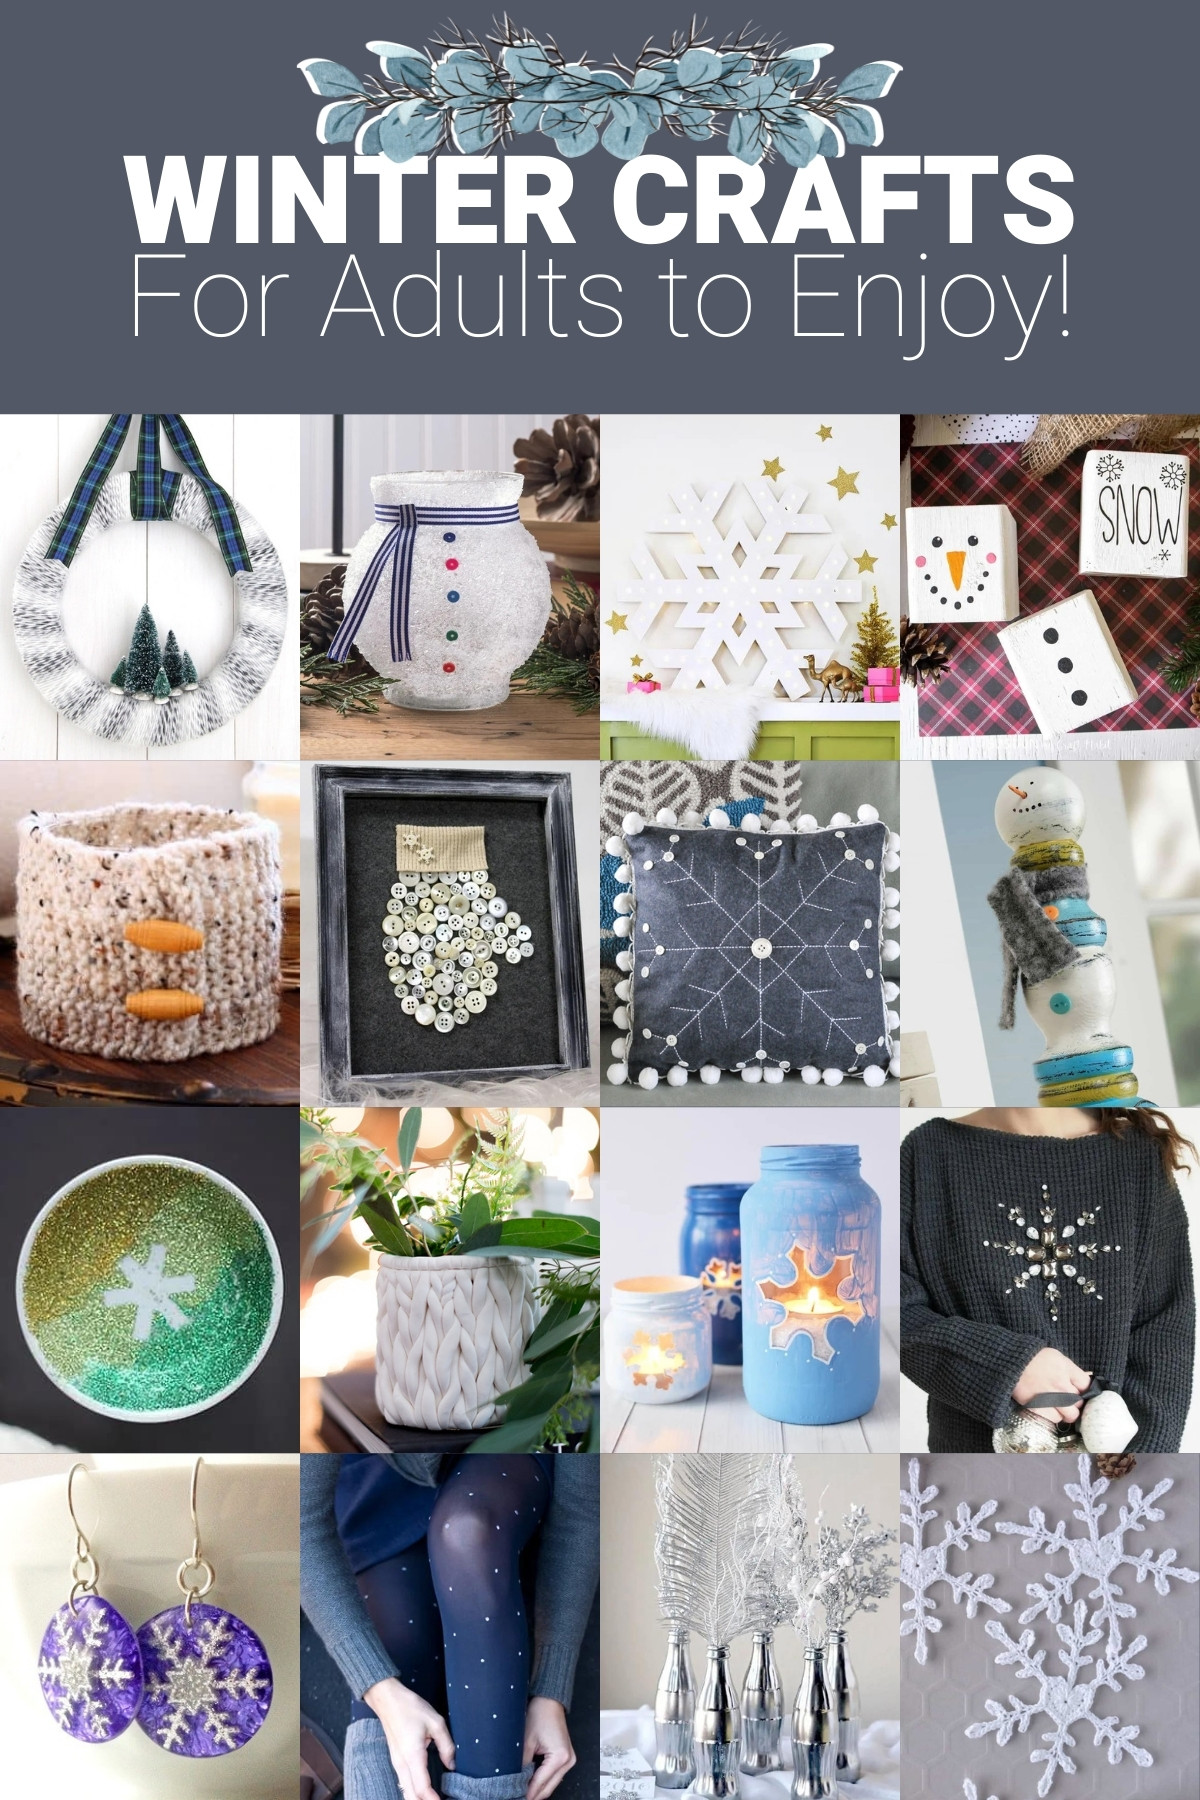 Winter Crafts for Adults to Enjoy